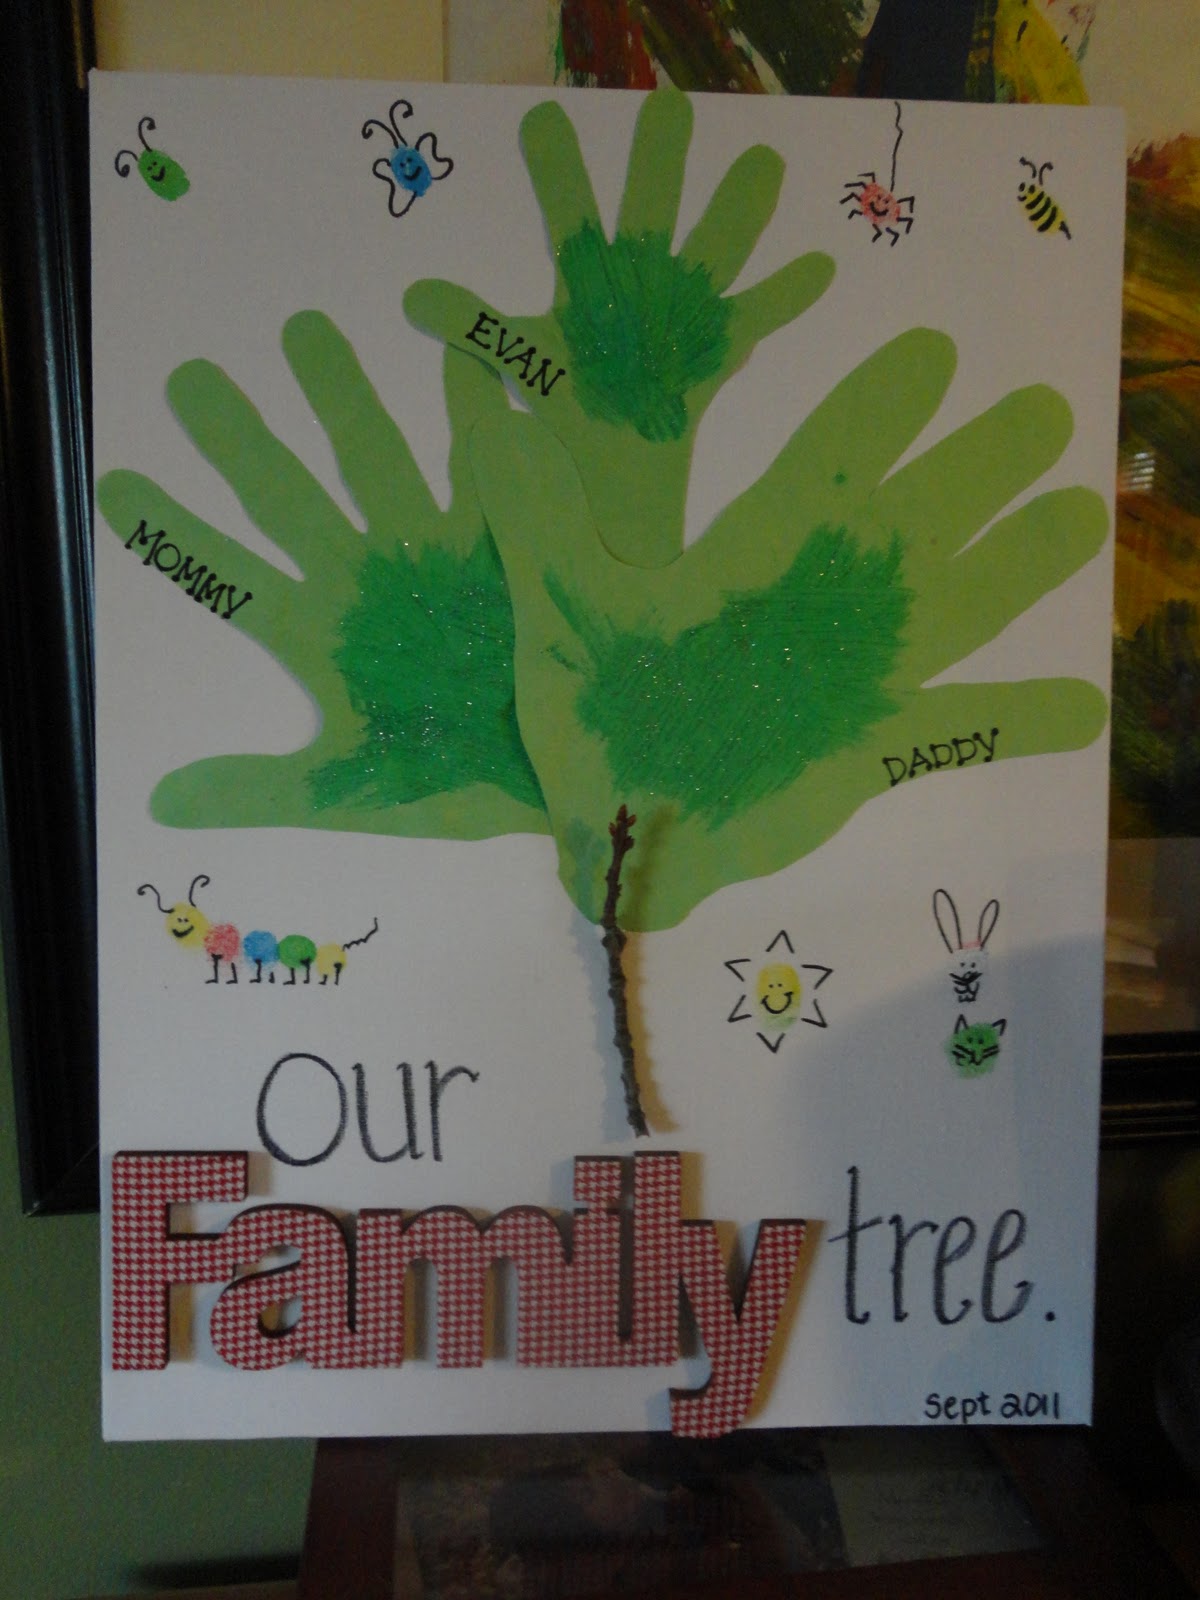 At Home with Kids: Our Family Tree